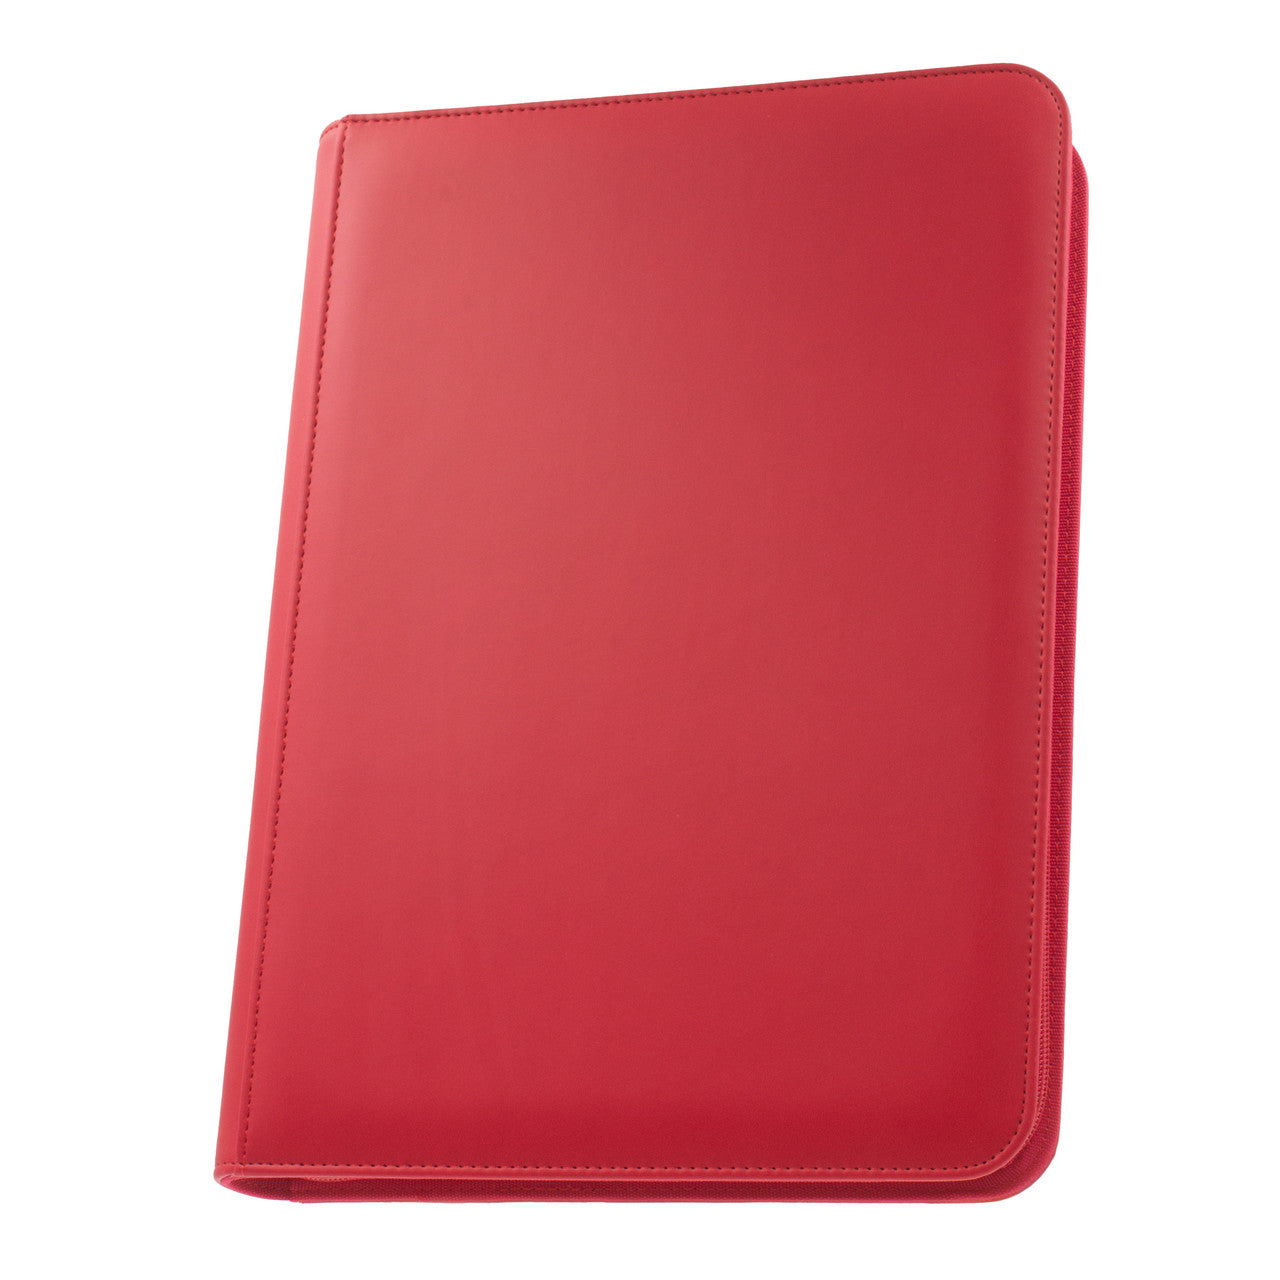 Palms Off Gaming STEALTH 9 Pocket Zip Trading Card Binder - Red